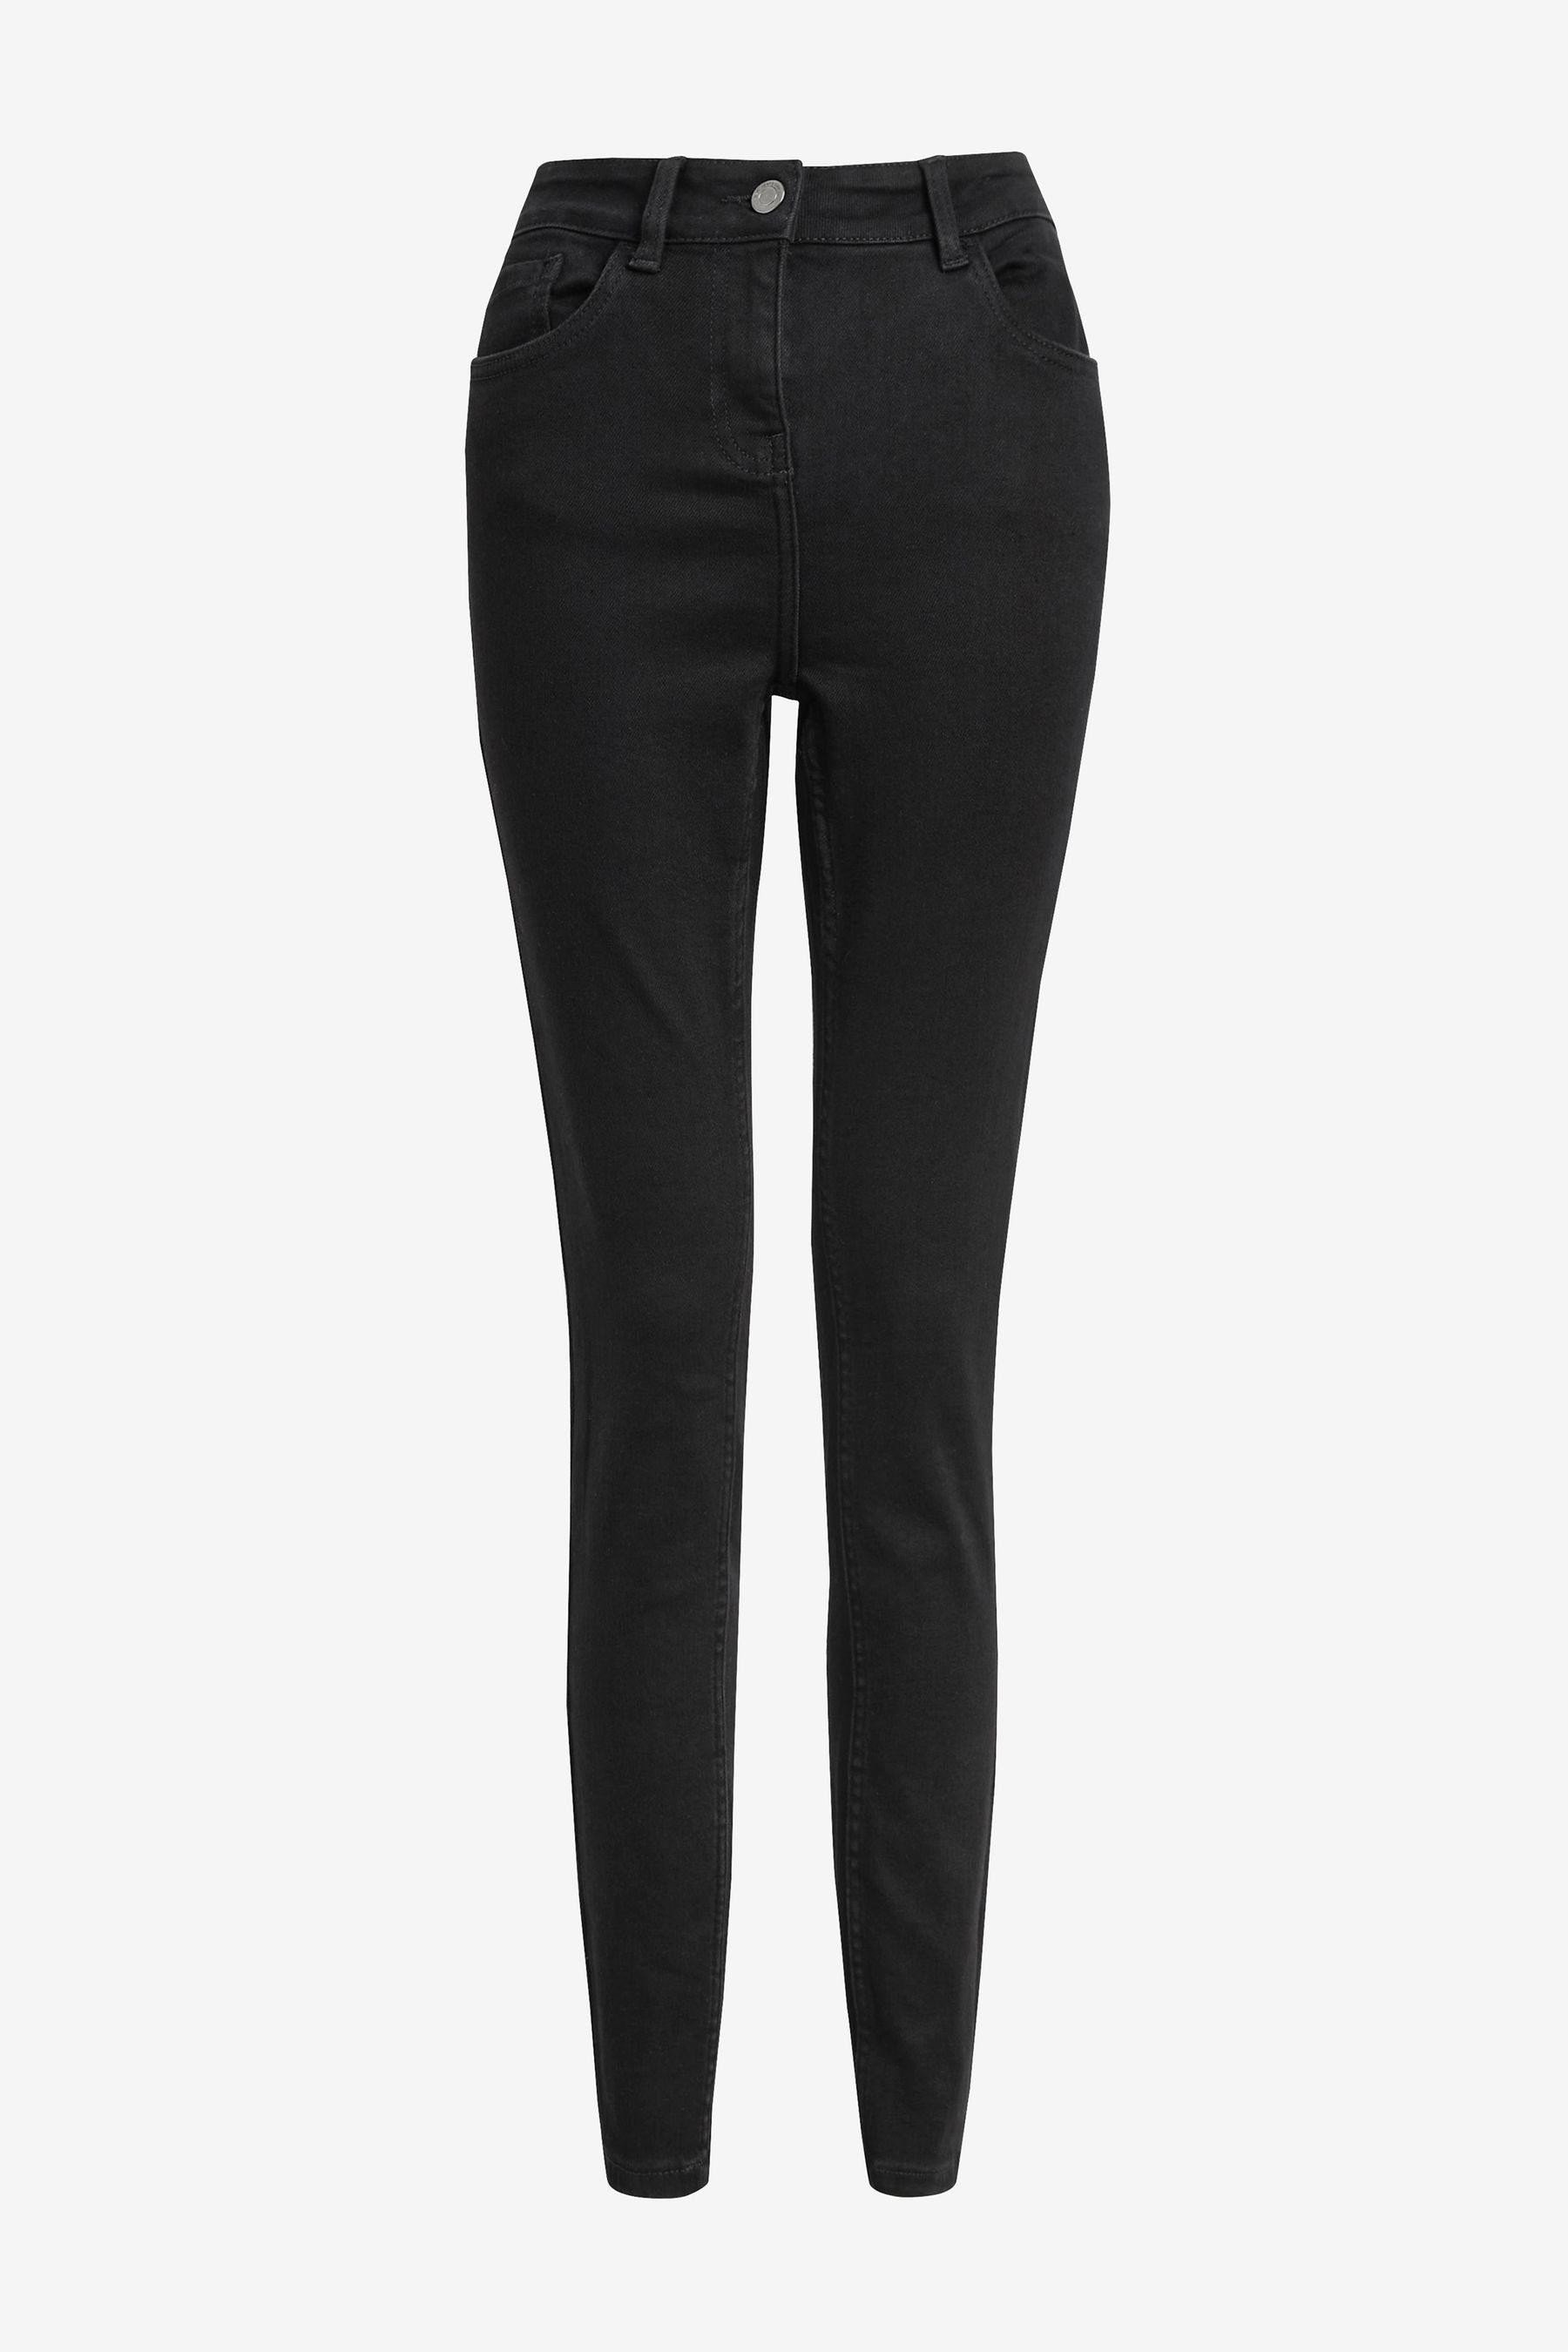 Next High-waist-Jeans Skinny-Jeans mit hoher Taille (1-tlg)